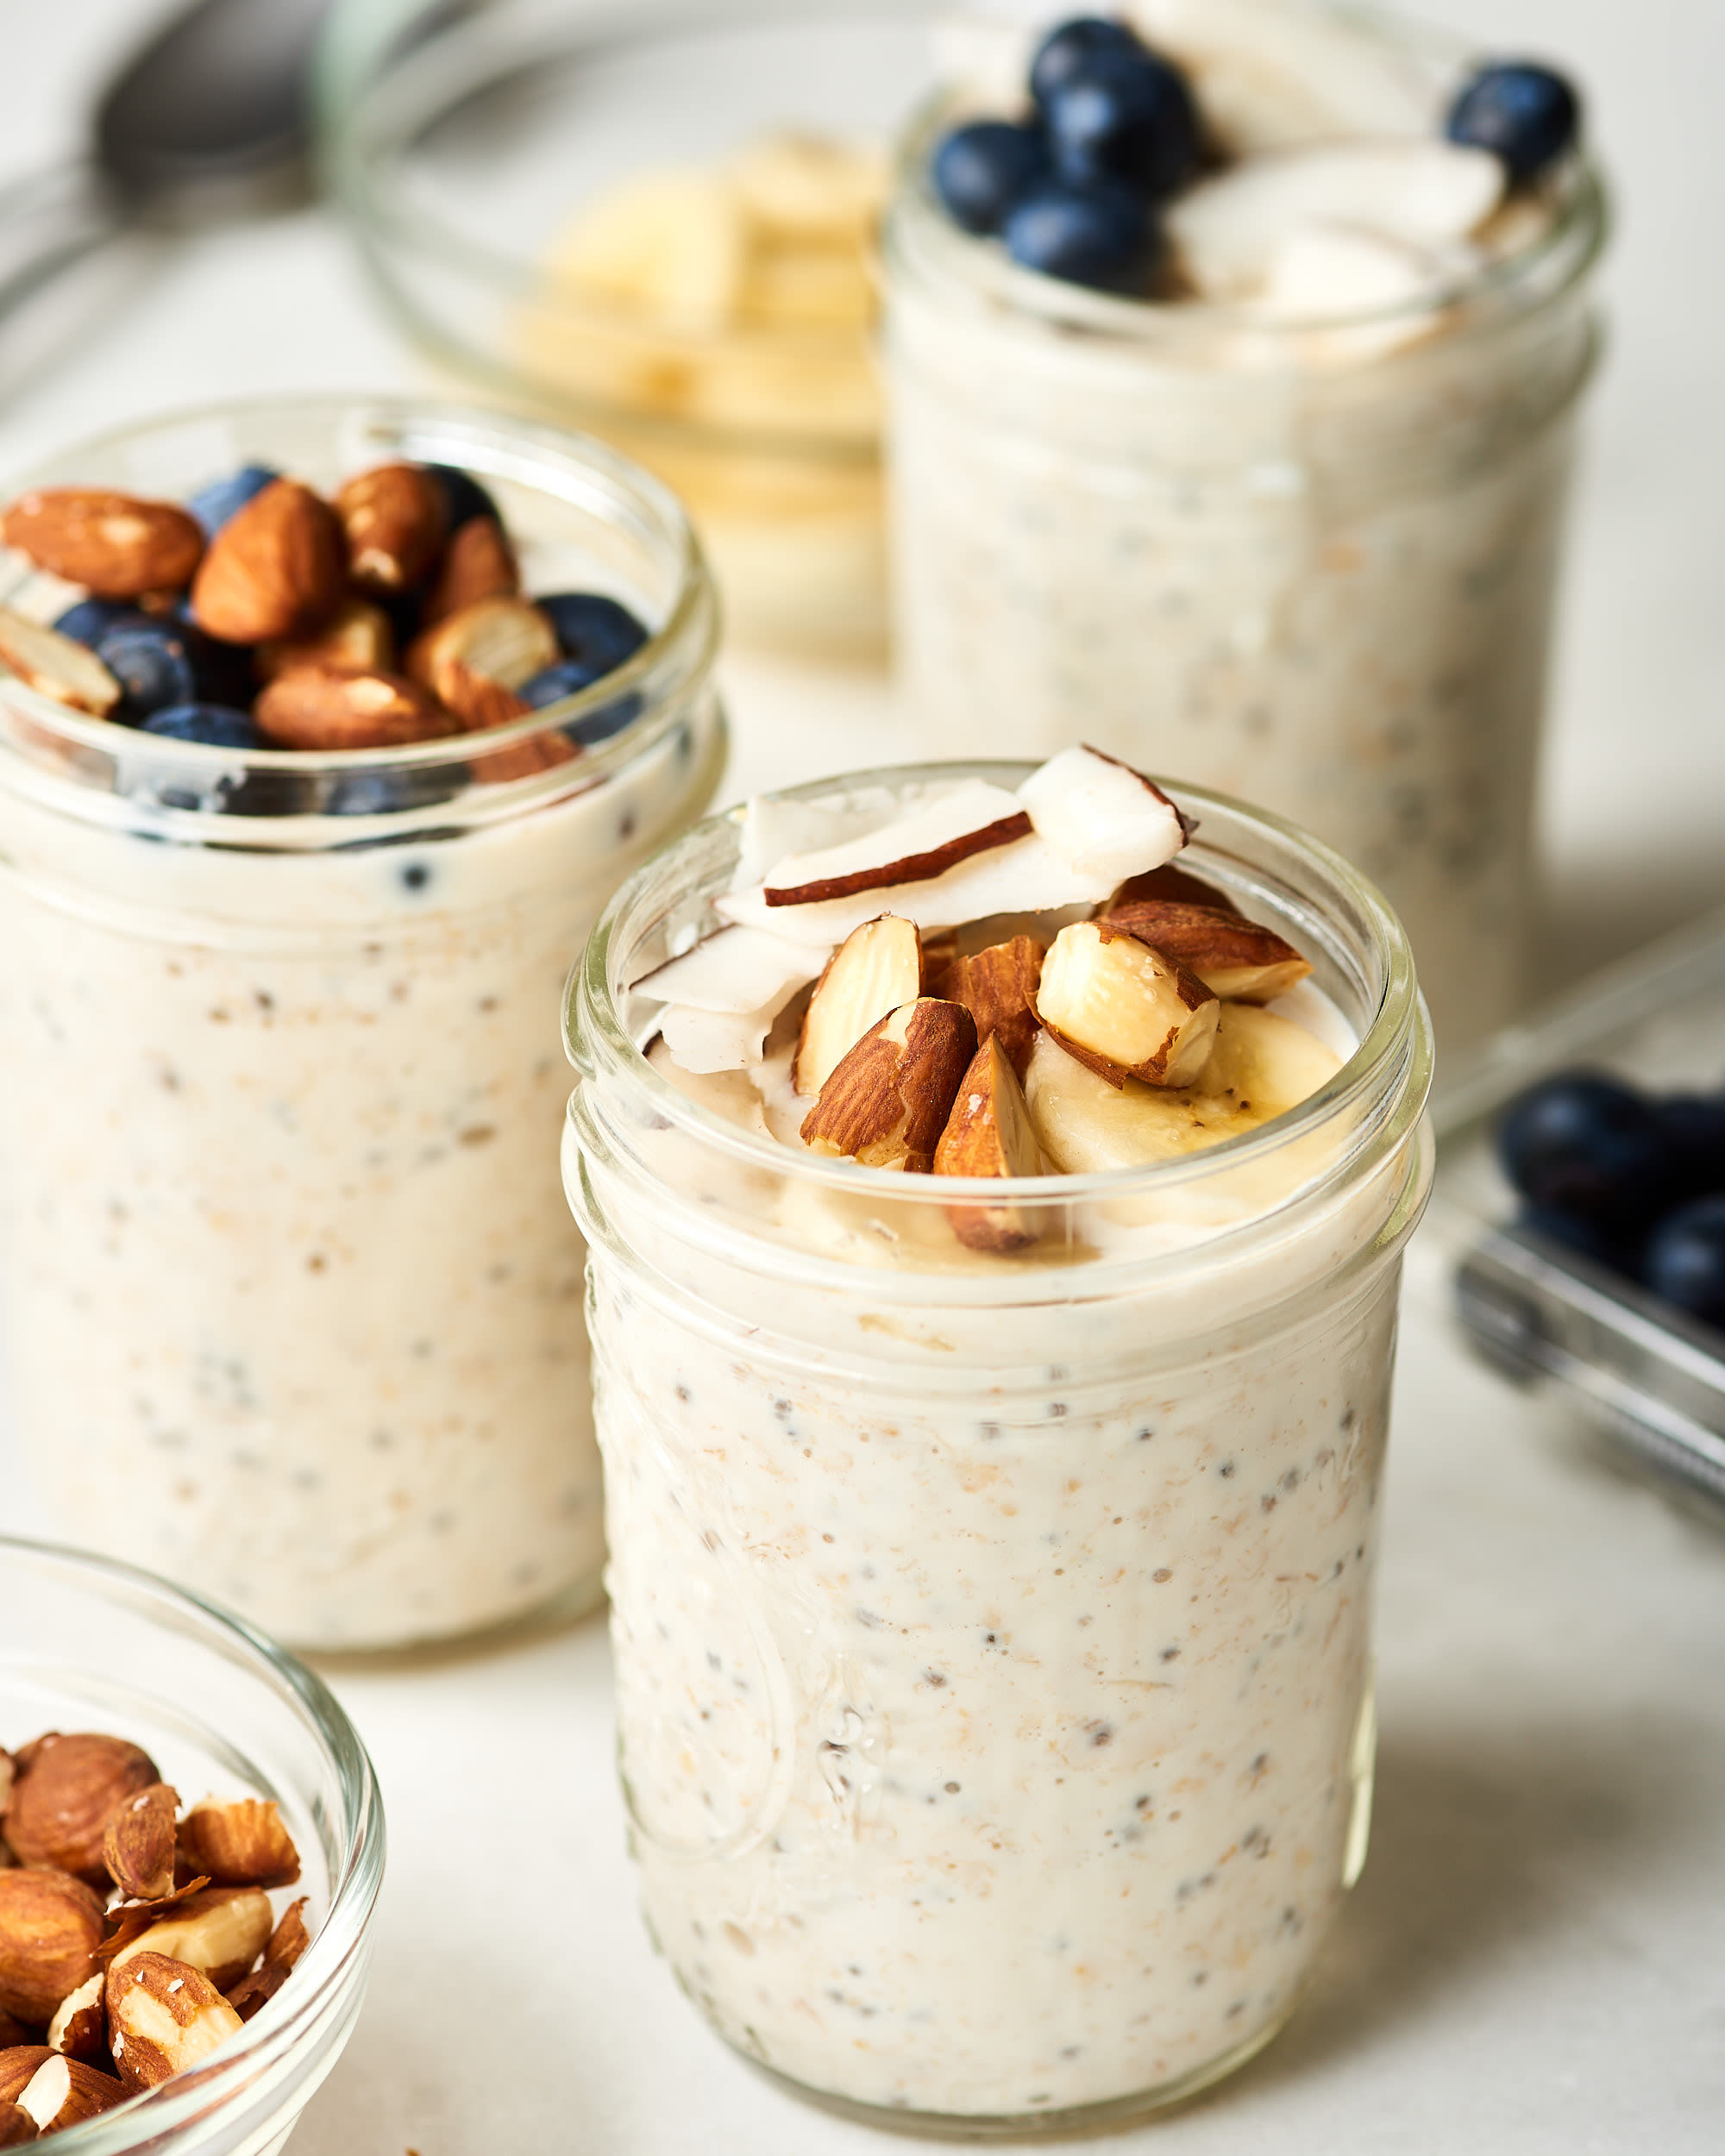 Breakfast In a Bottle on X: Oats soaked overnight a.k.a ONO Jars. Premium  quality Rolled Oats and Chia Seeds soaked overnight in fresh coconut milk.  ONO Jars will be the best Go